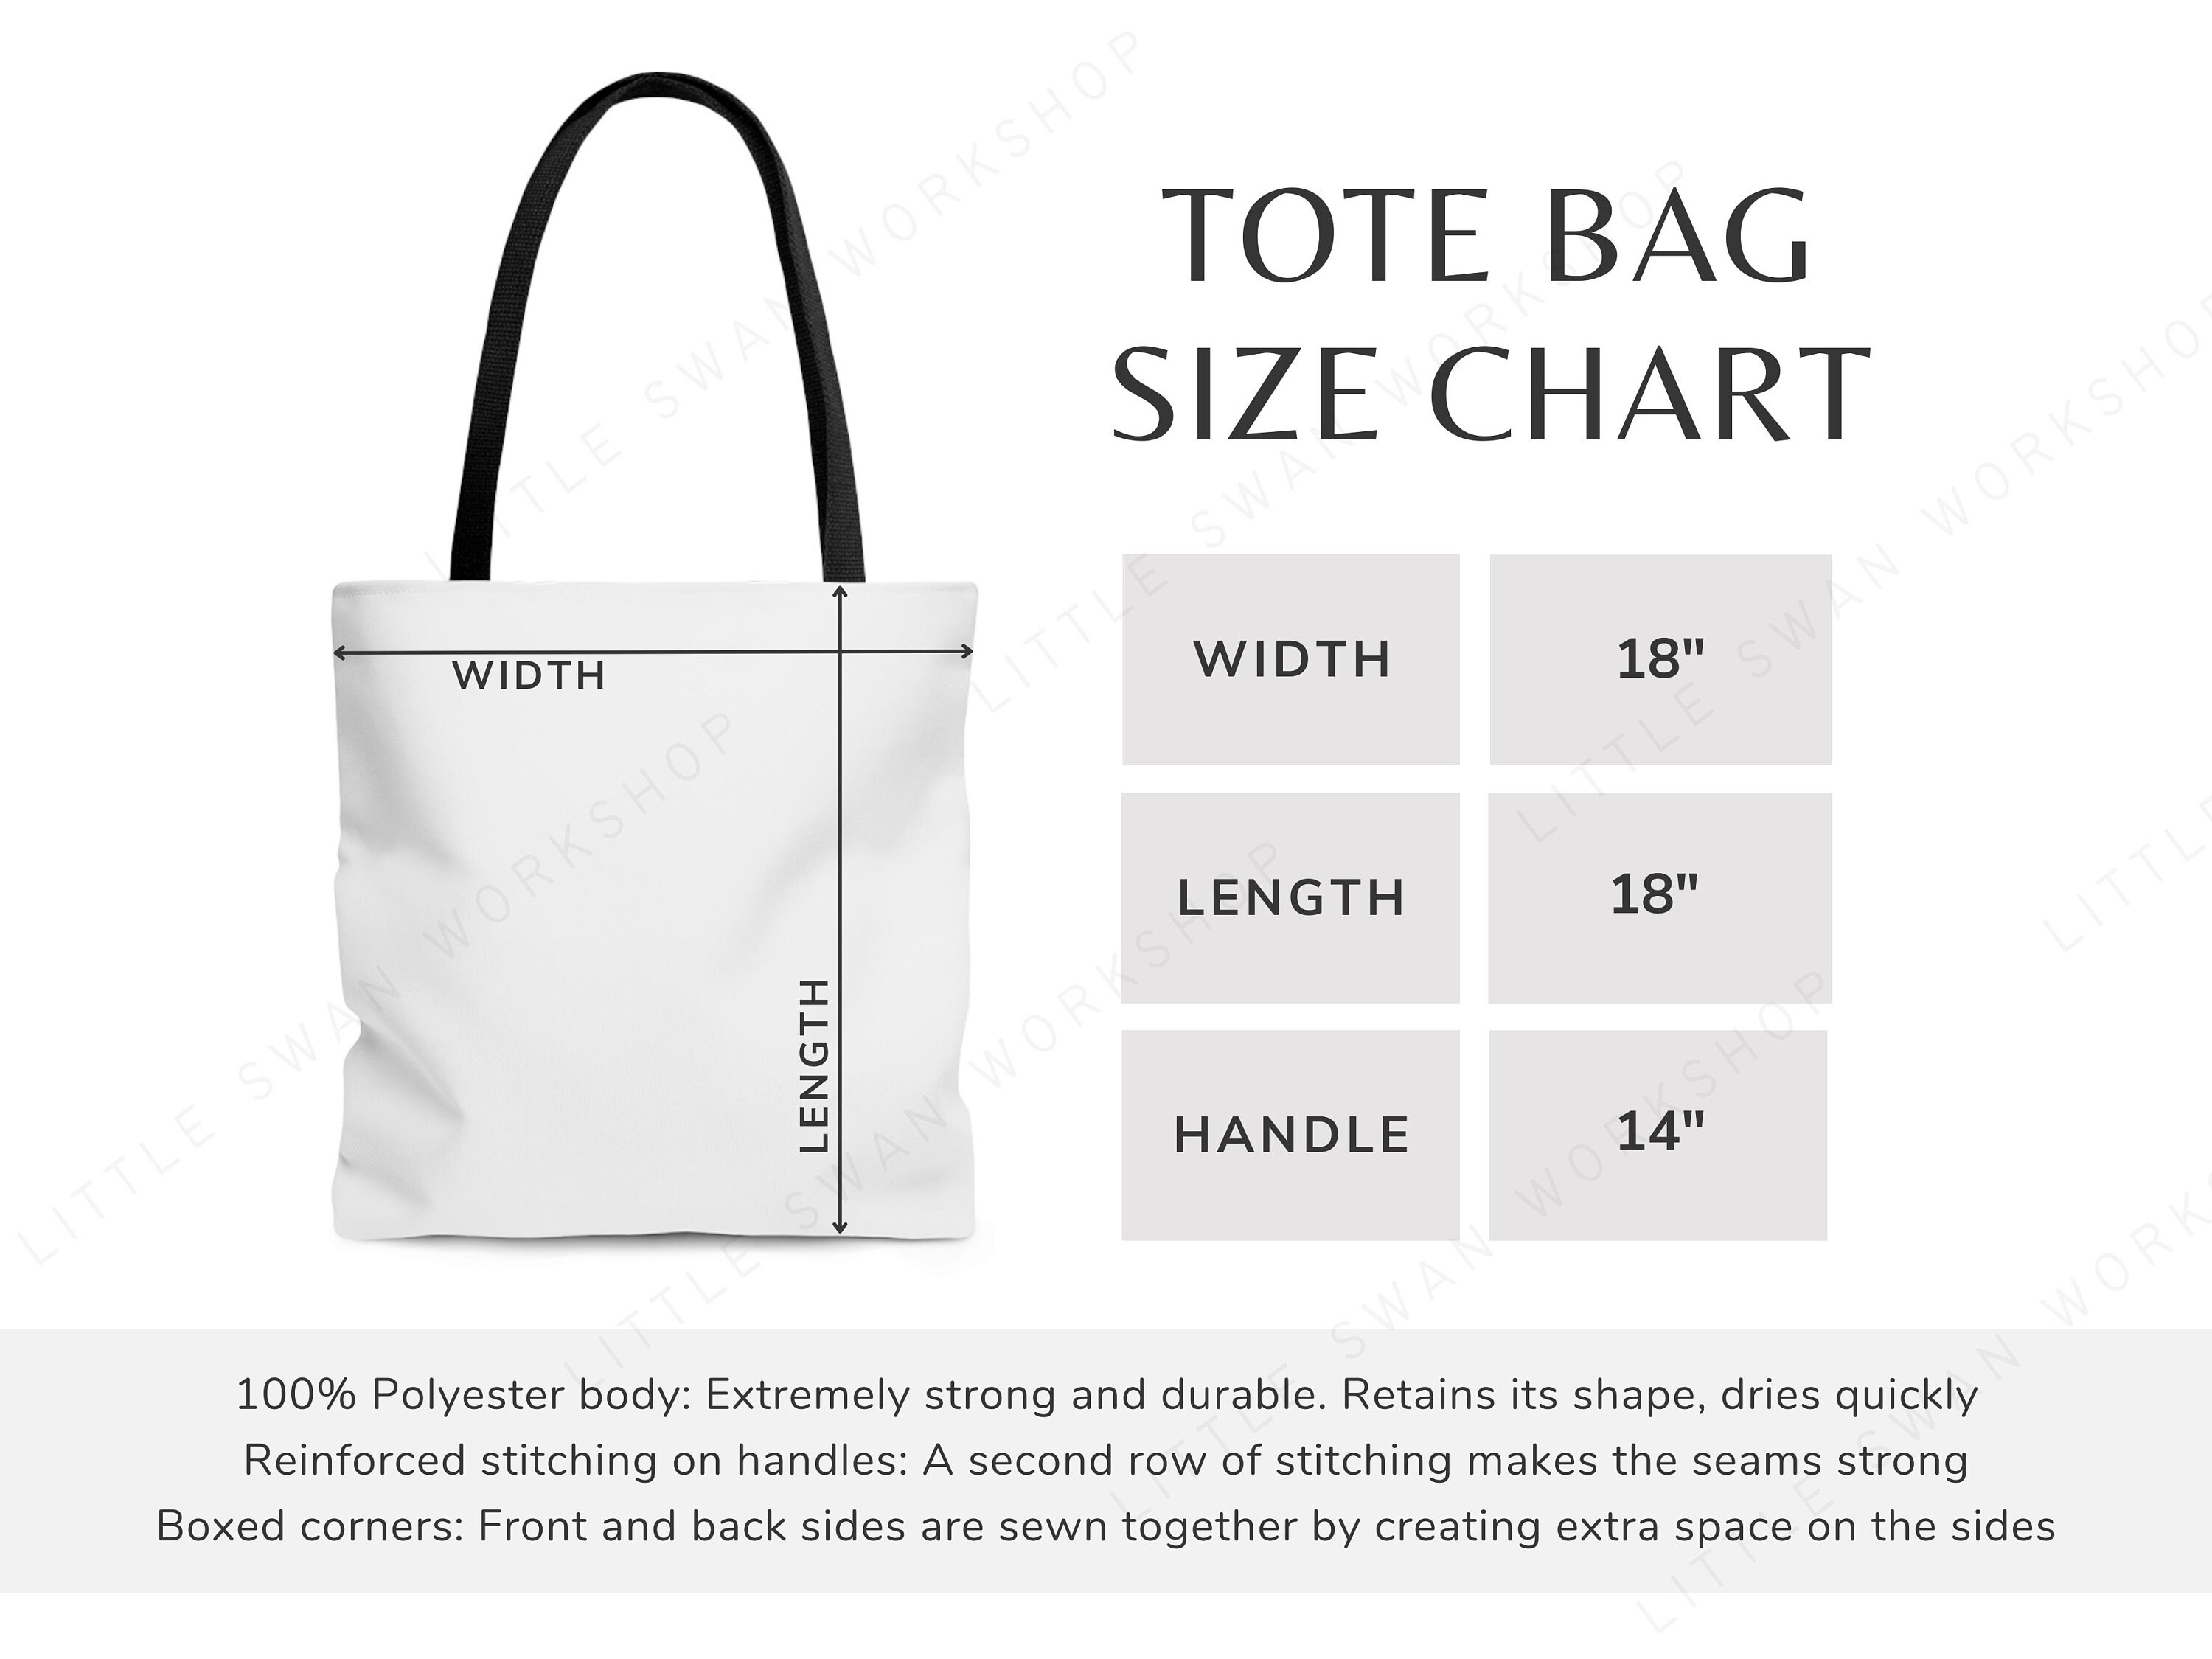 Tote Bag Size Chart AOP Tote Size Chart Sizing Chart for -  Sweden